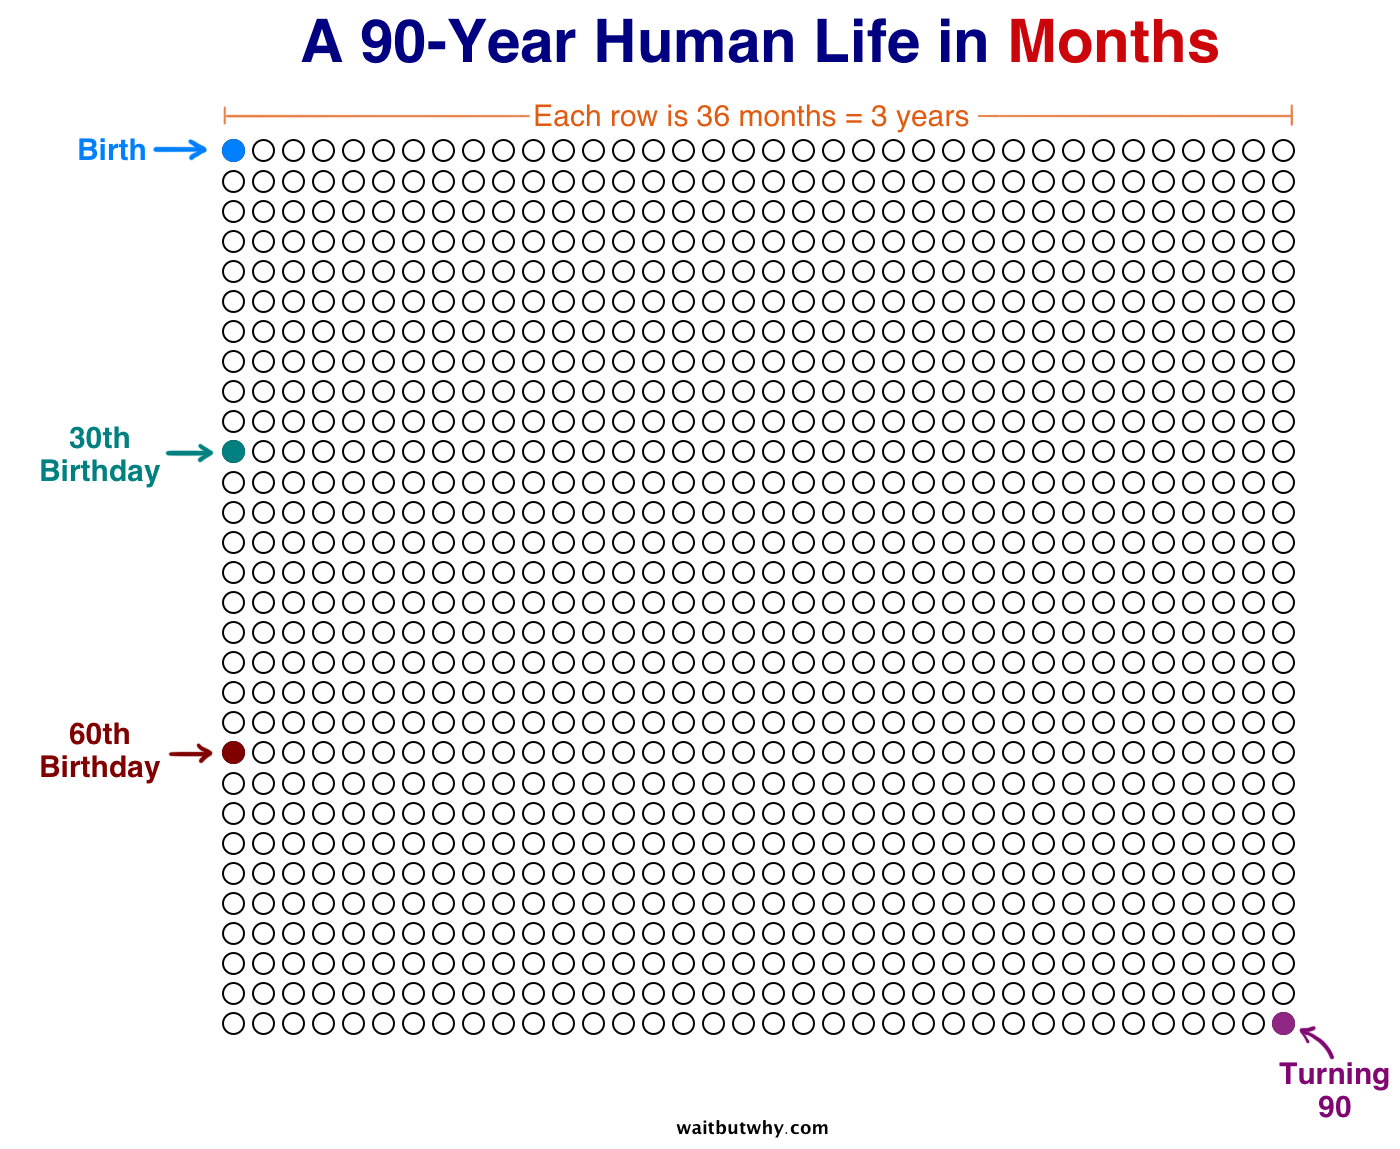 A Human Life in Months